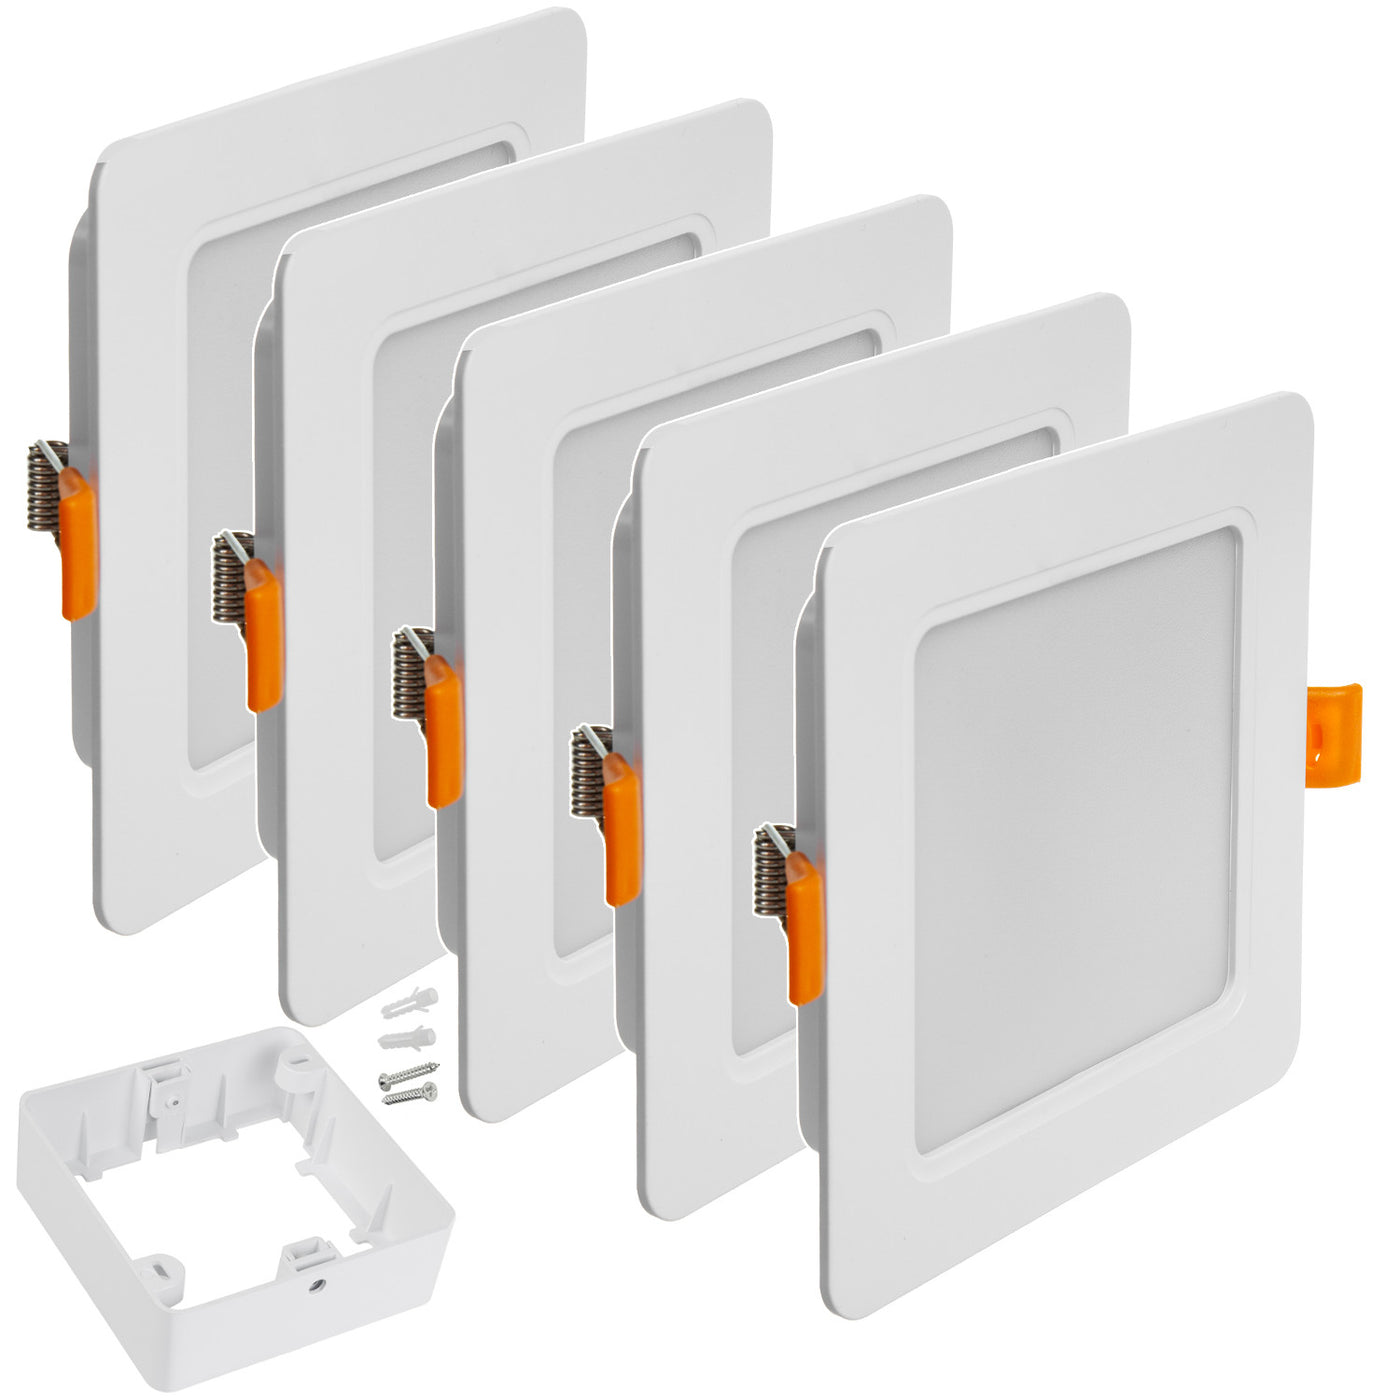 5x panel LED sufitowy Maclean, podtynkowy SLIM, 18W, Neutral White 4000K, 170*26mm, 1800 lm, MCE372 R + adapter natynkowy MCE377 R